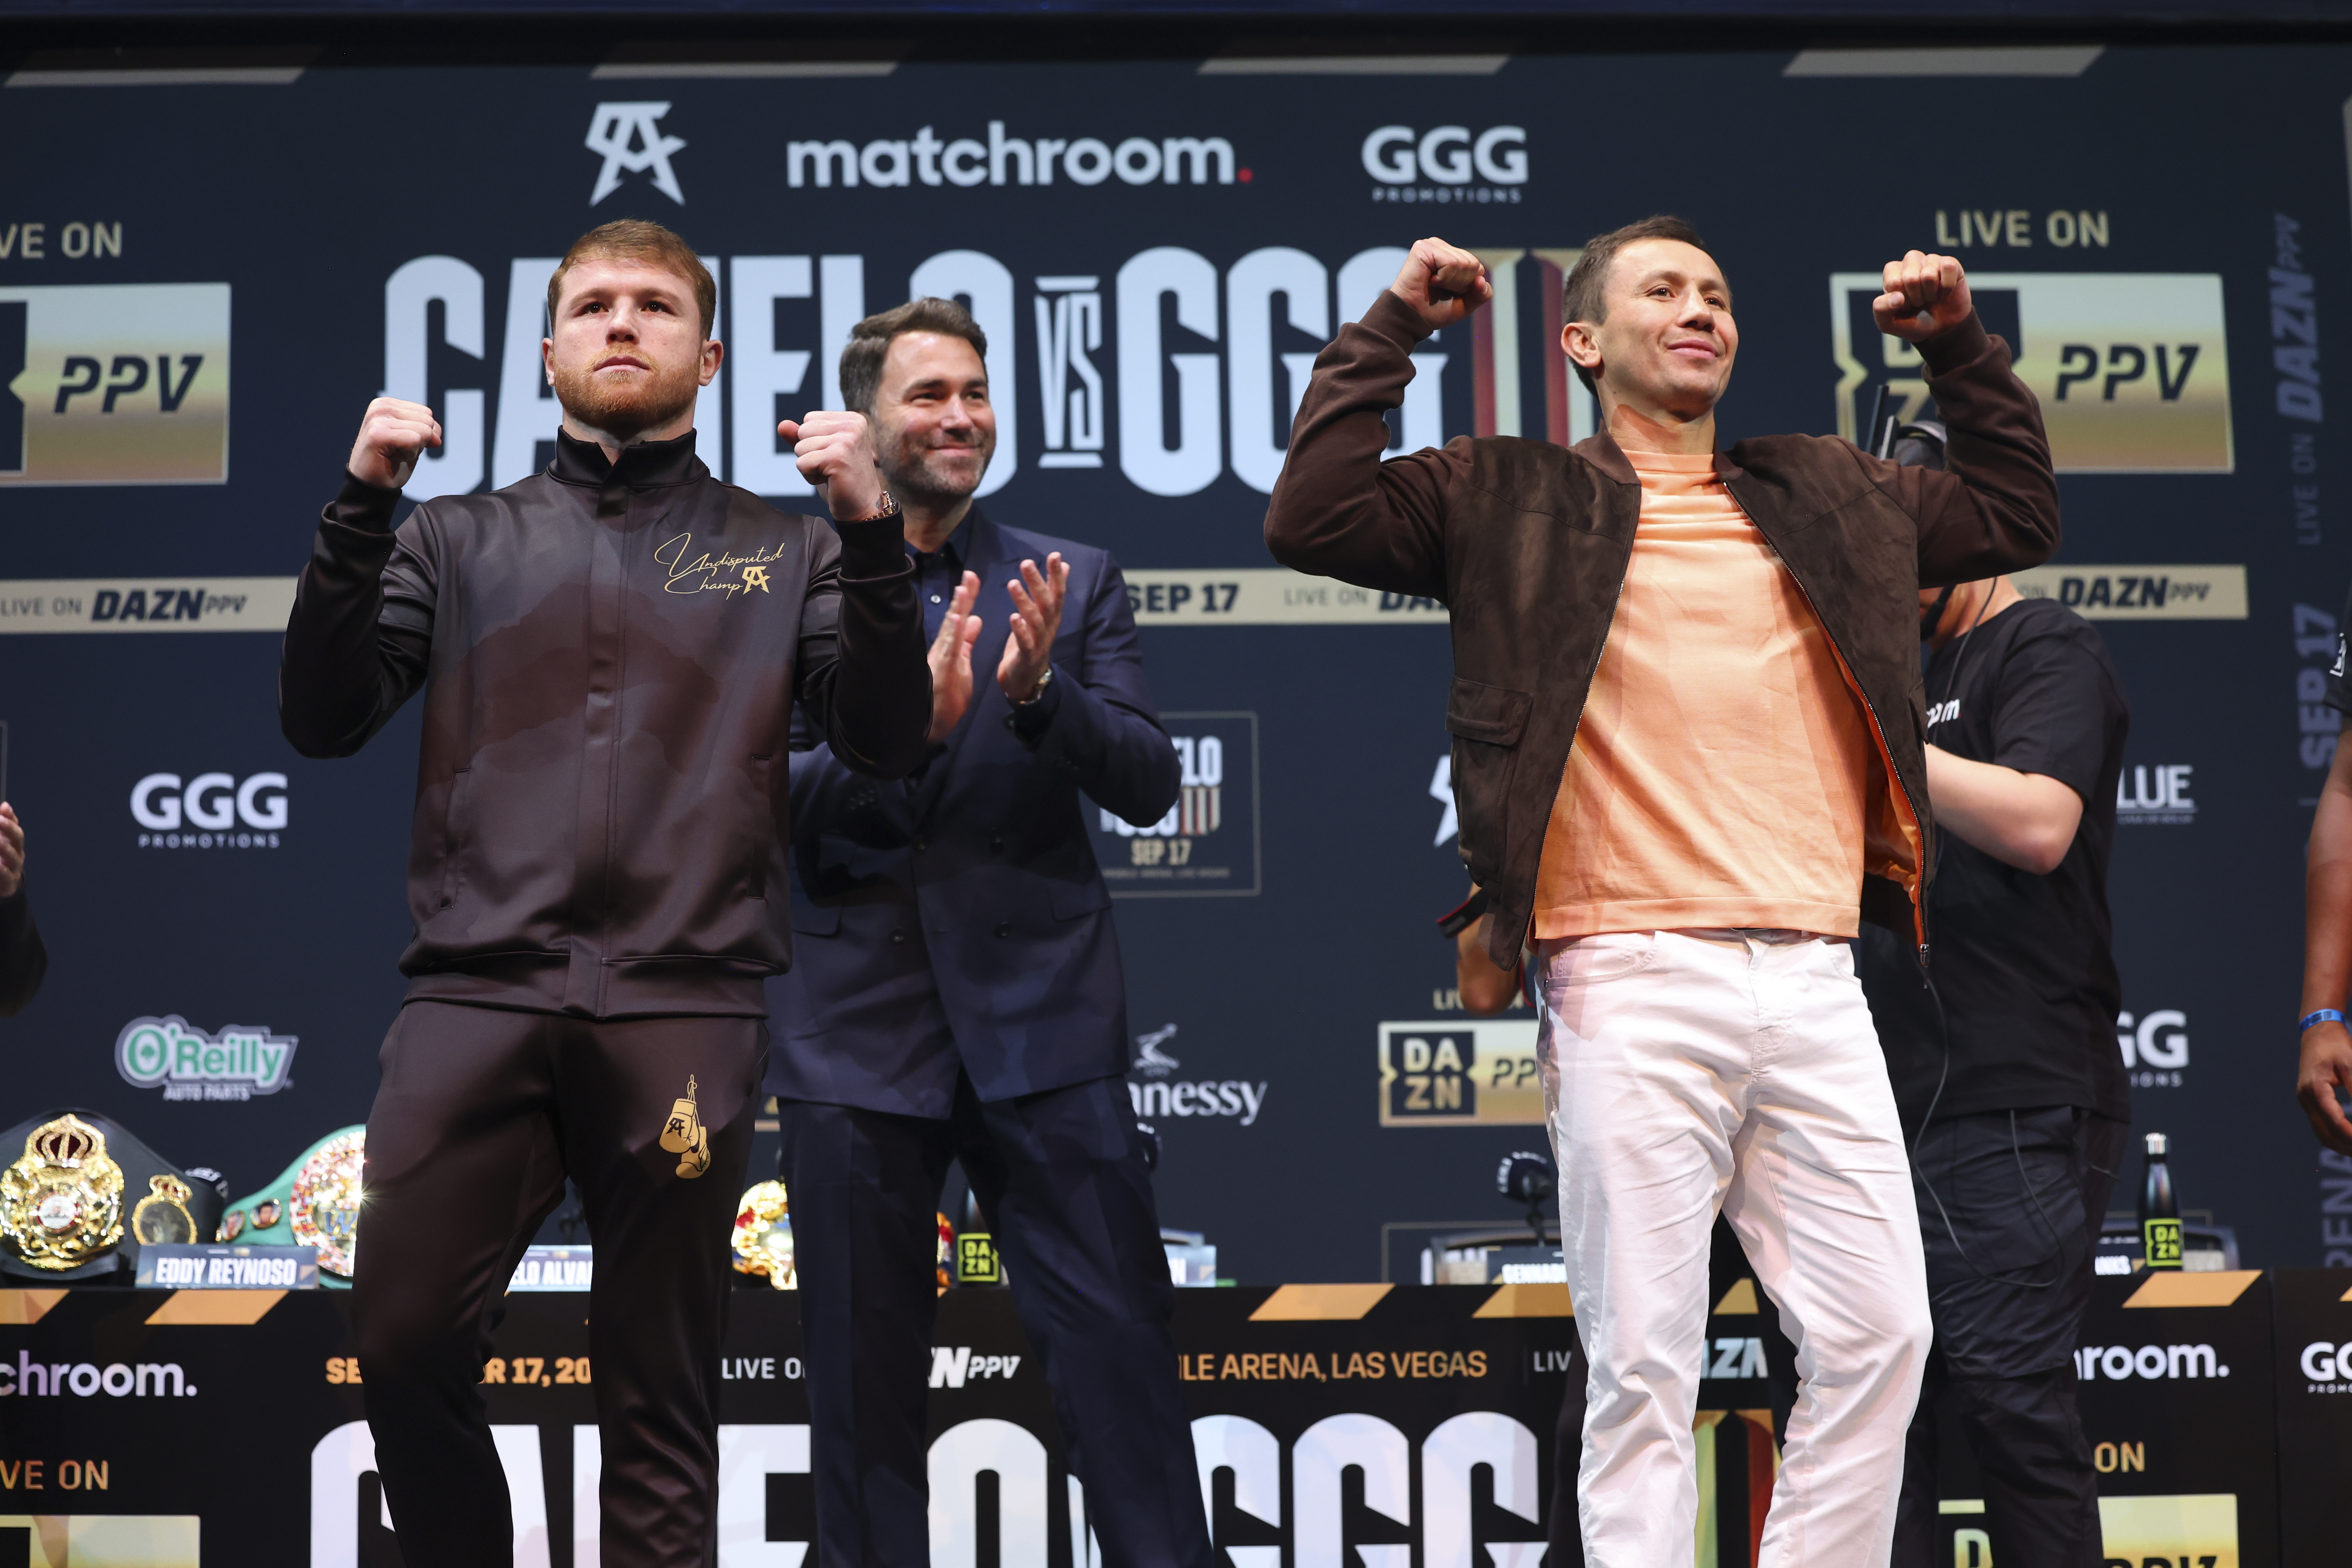 Canelo Alvarez and Gennadiy Golovkin meet for a third and possibly final time. Who wins on Saturday?